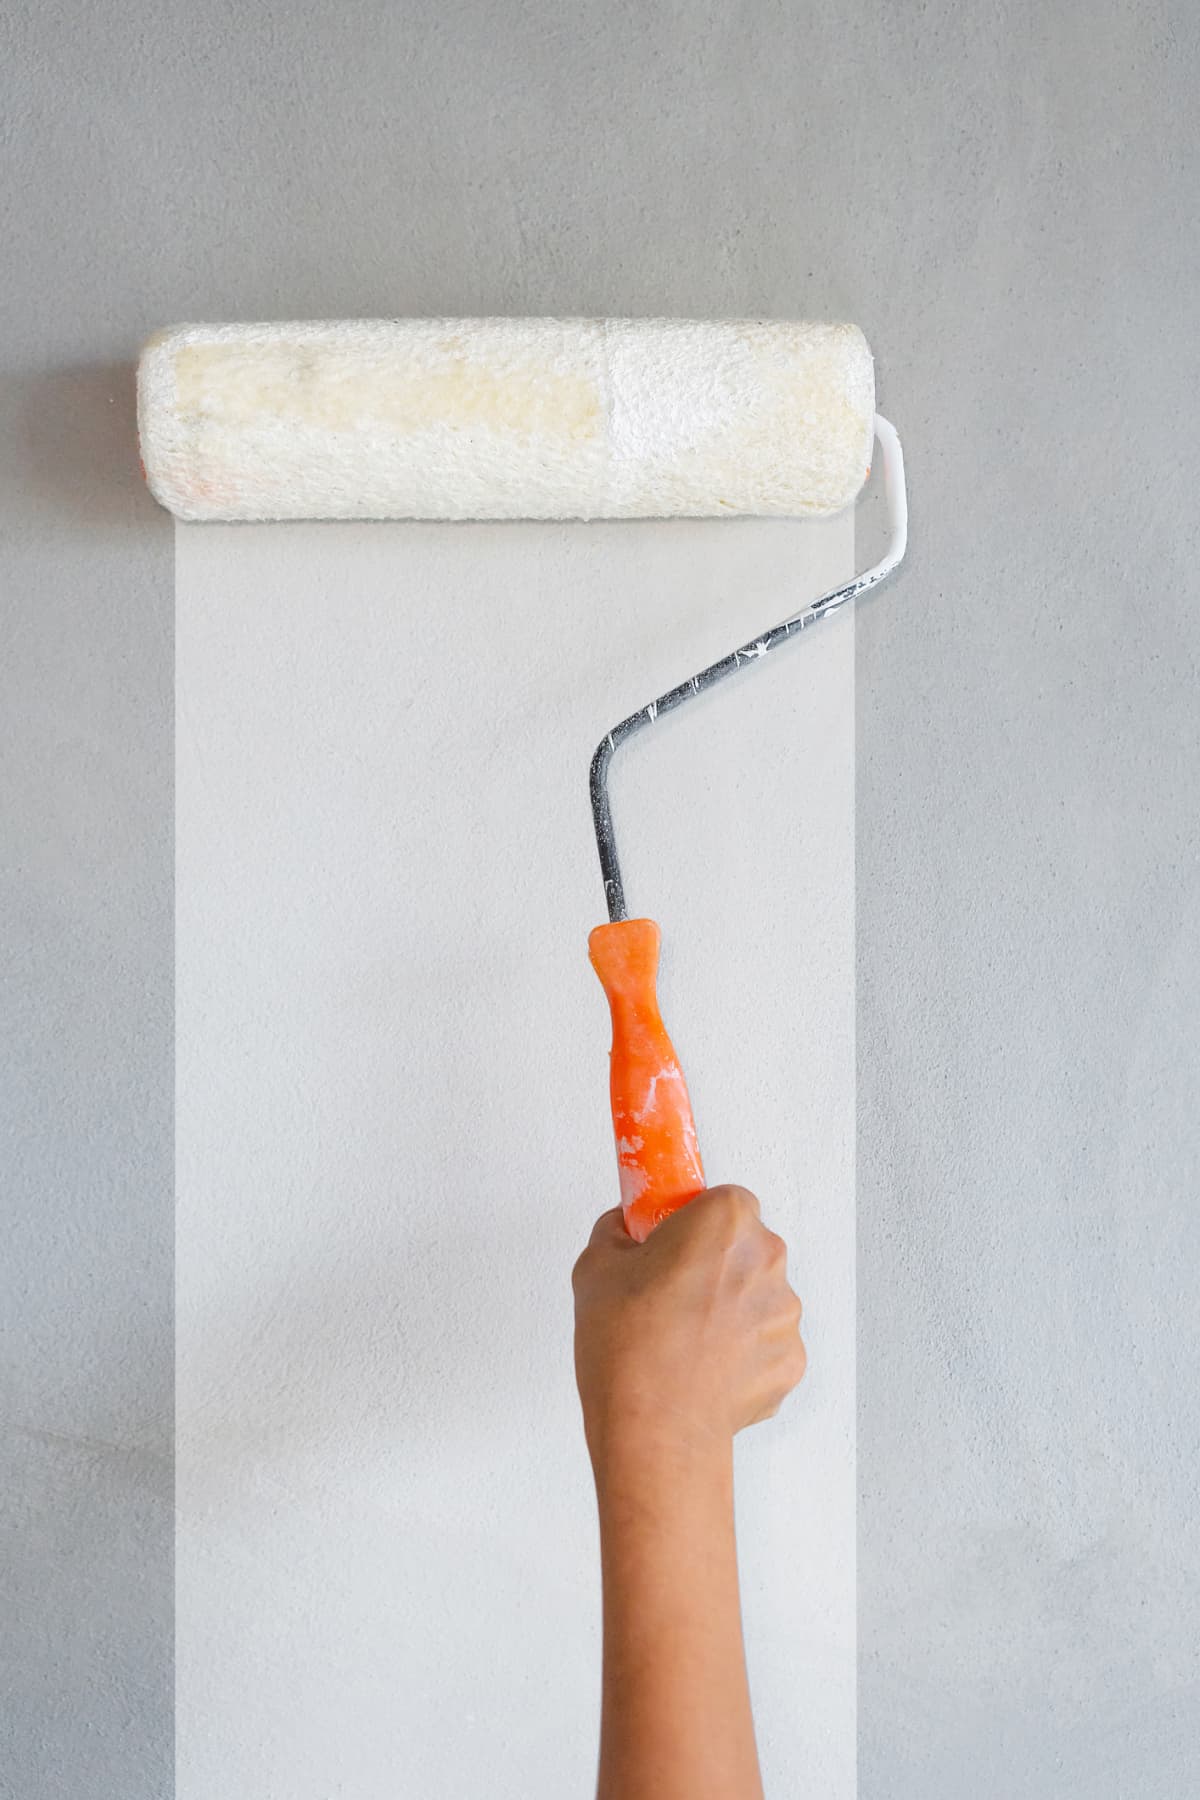 Painting wall with roller brush